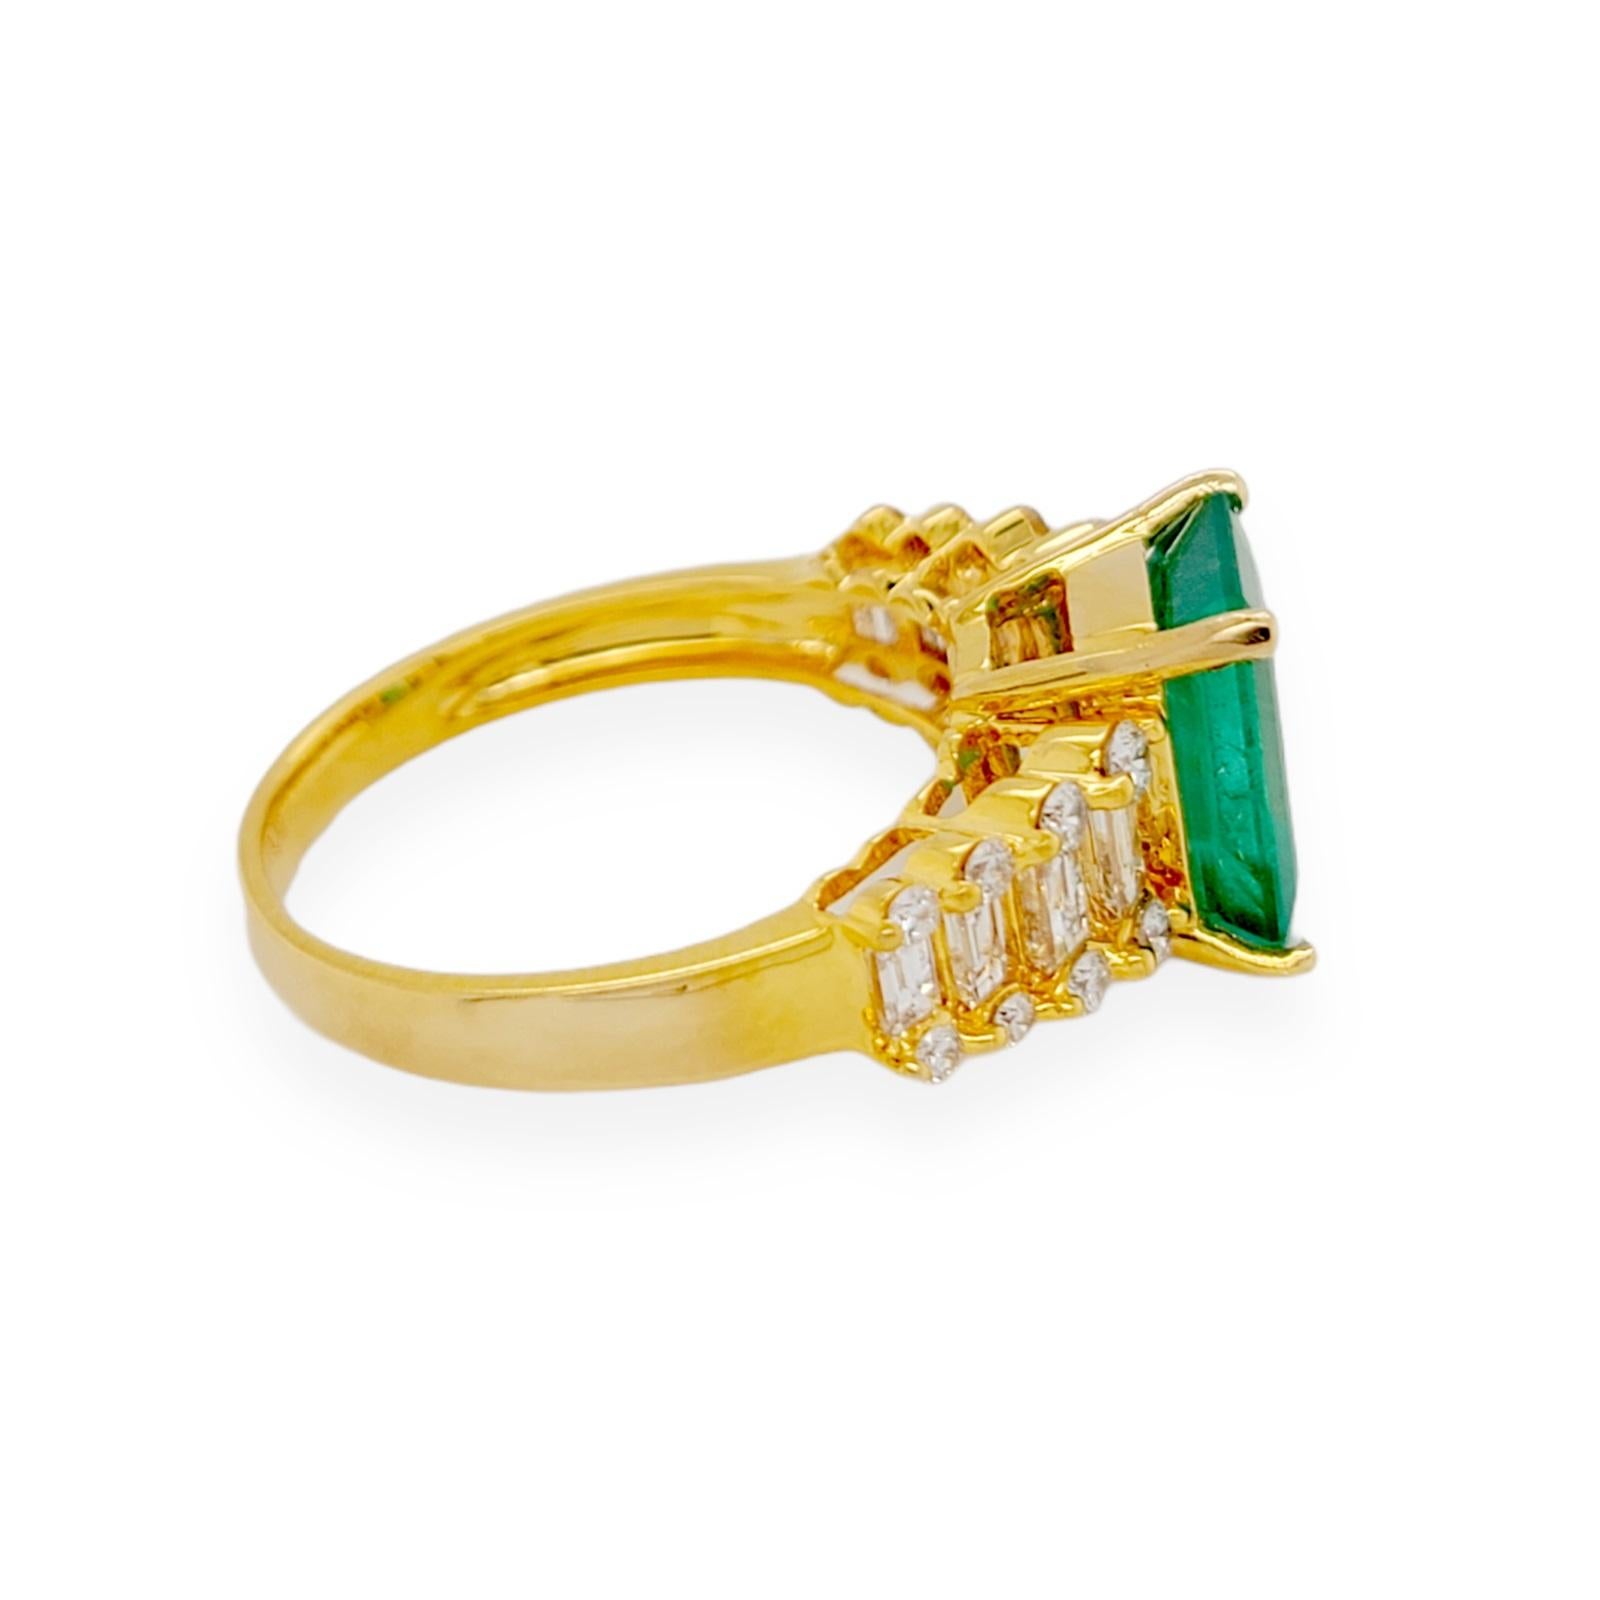 Women's or Men's 2.58 Ct Zambian Emerald & 1.03 Ct Diamonds in 18k Yellow Gold Engagement Ring For Sale